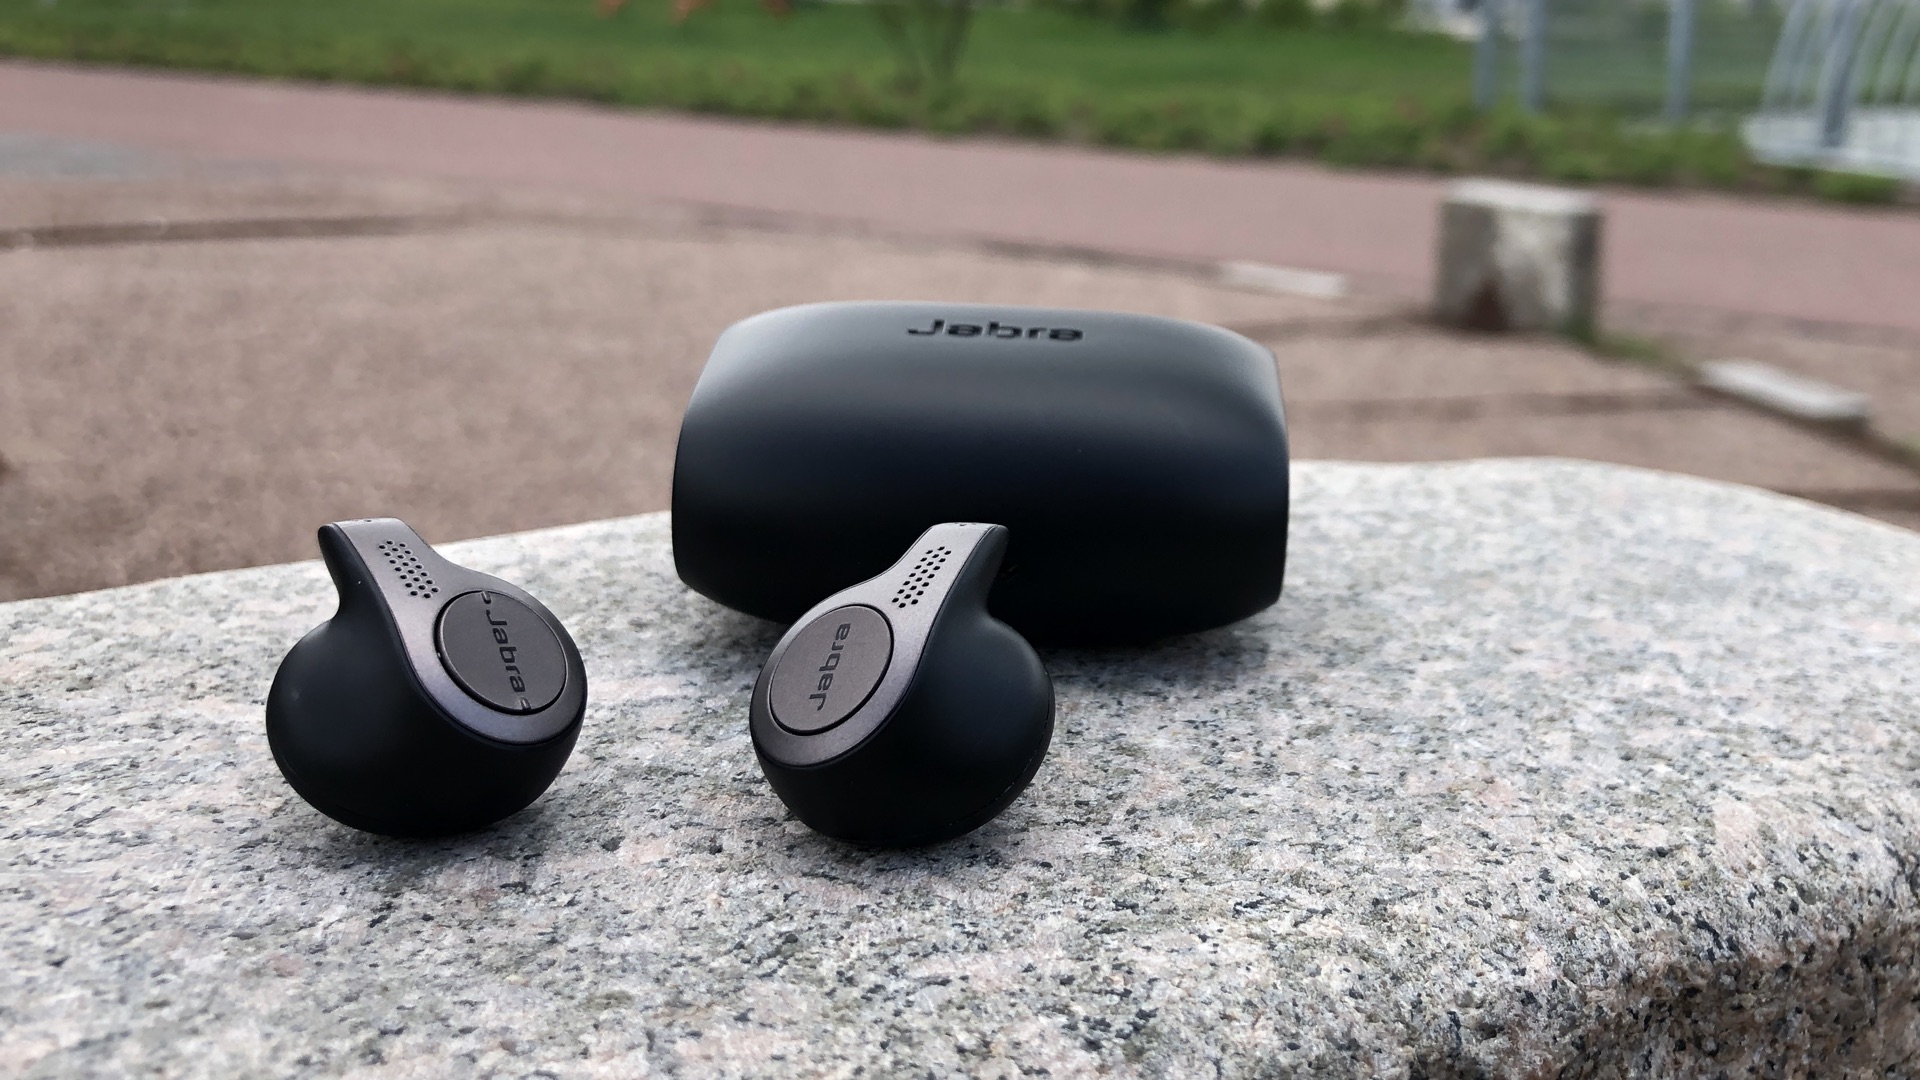 Jabra Elite 65t pair and its case placed on rock in the garden